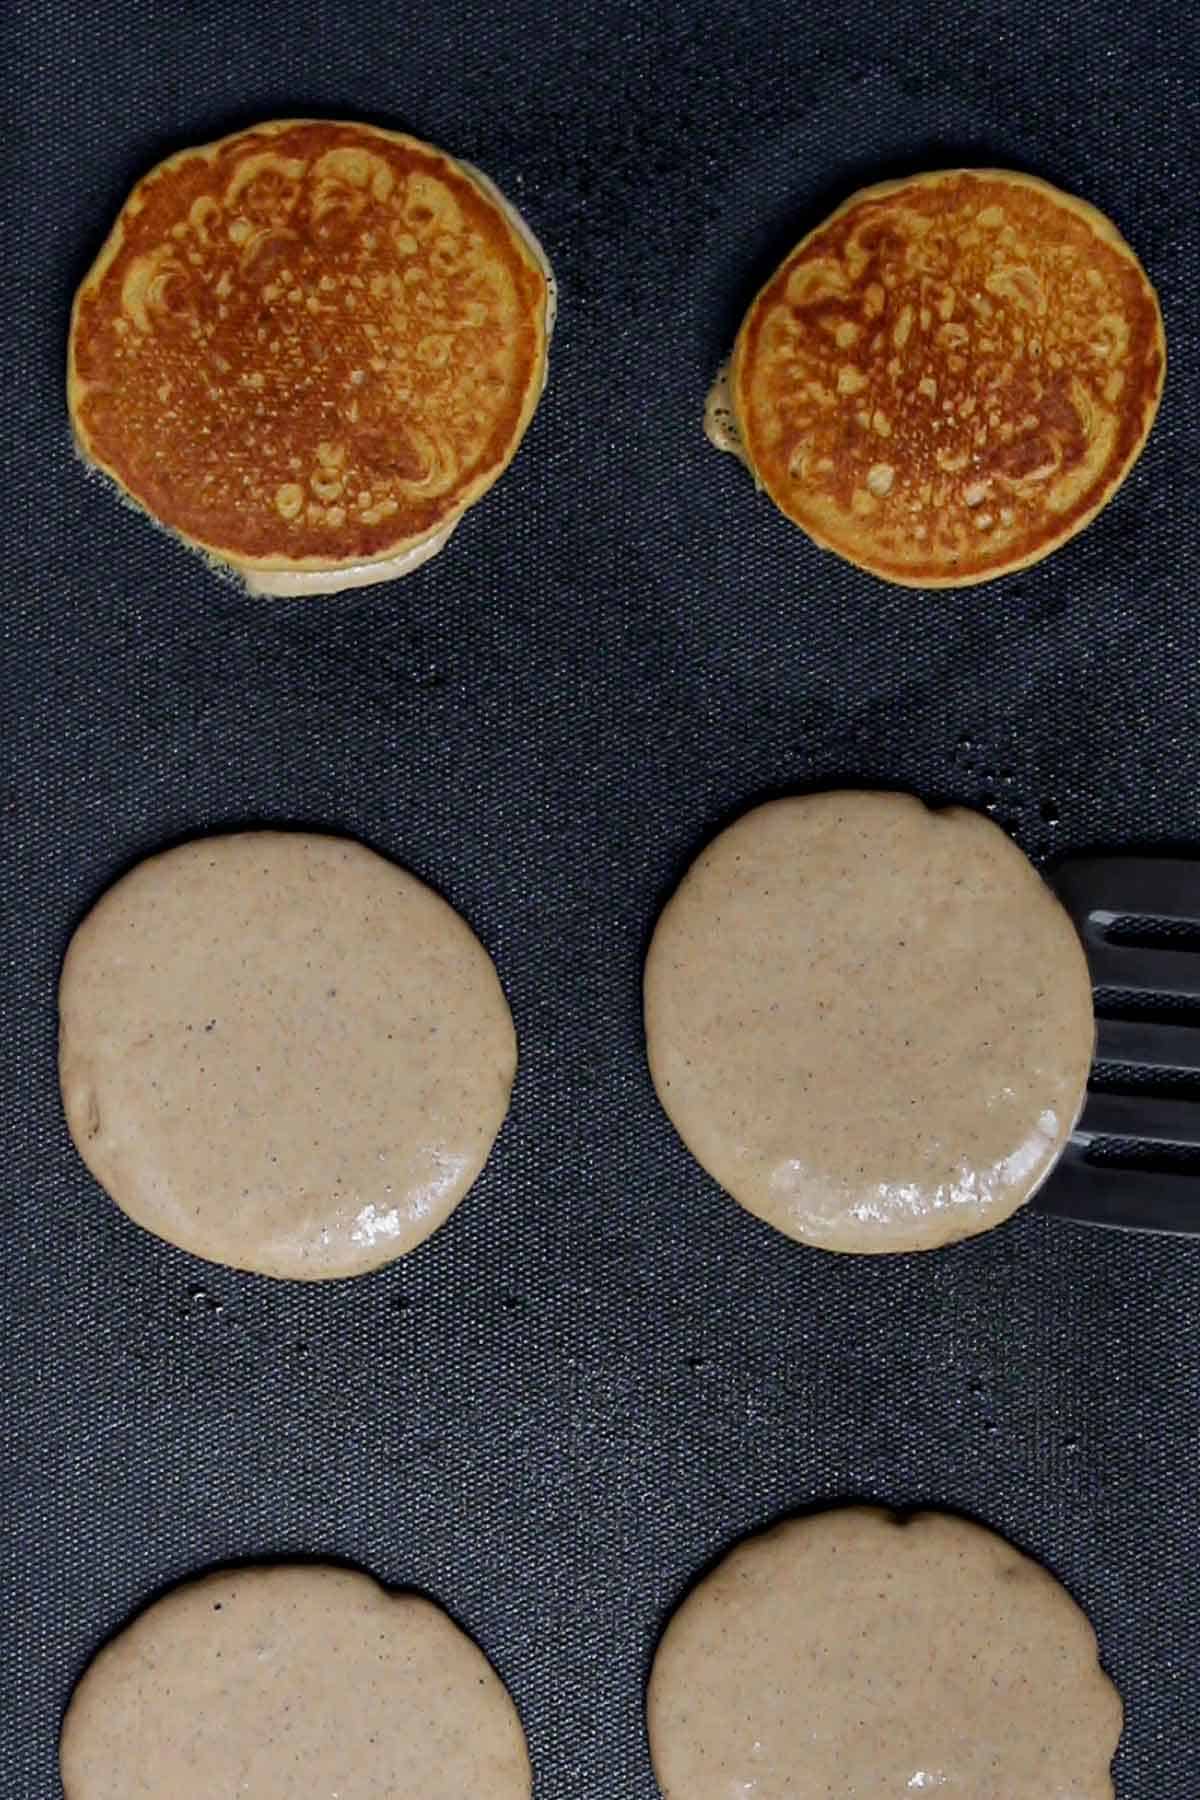 Pancakes flipped when golden on one side.